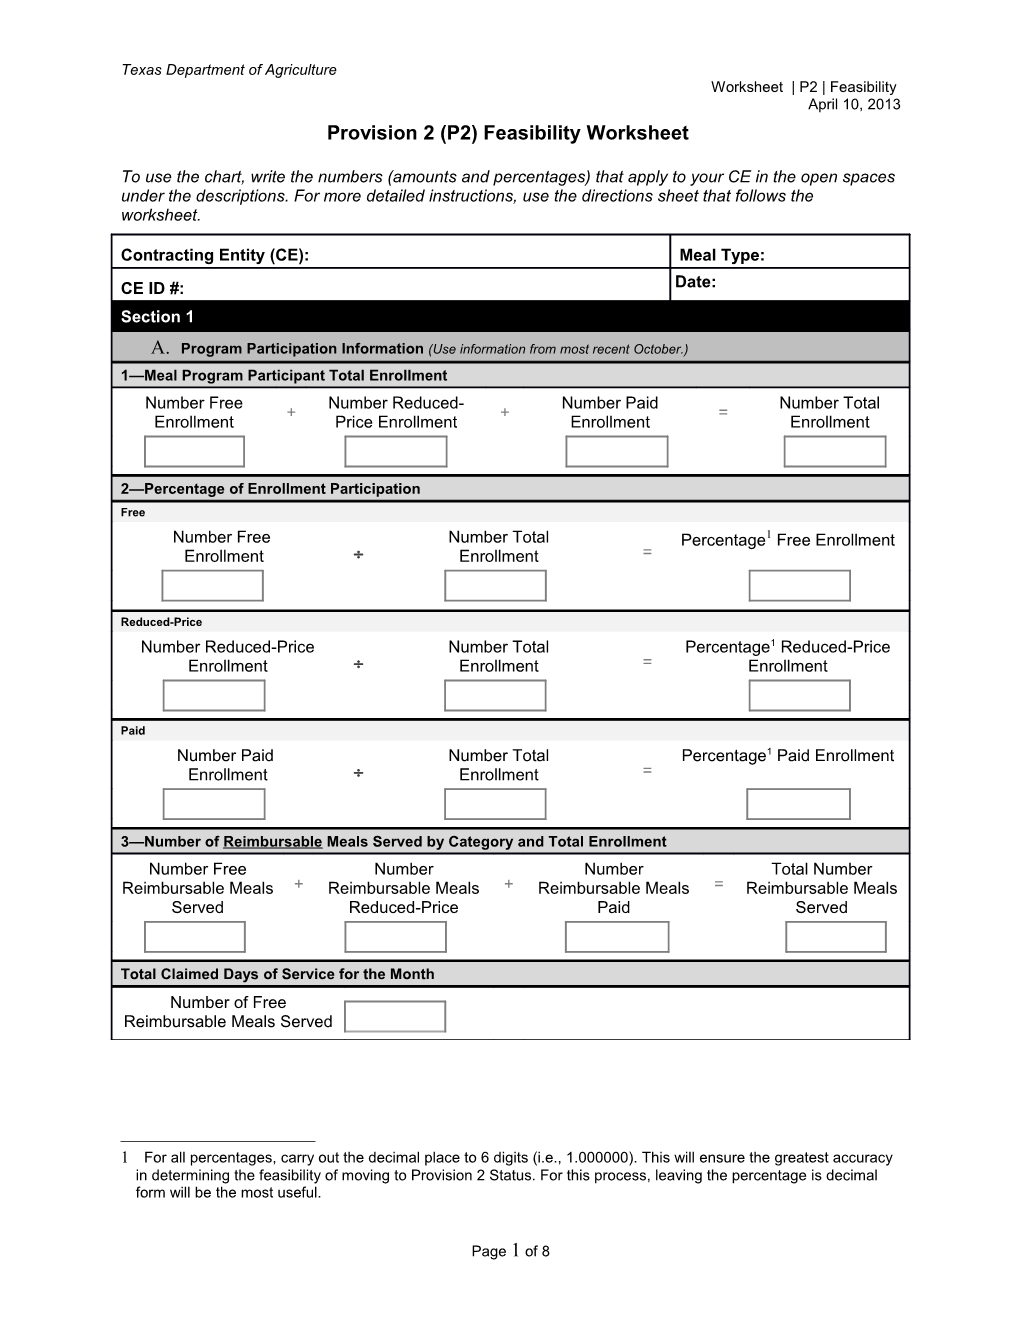 Provision 2 (P2) Feasibility Worksheet